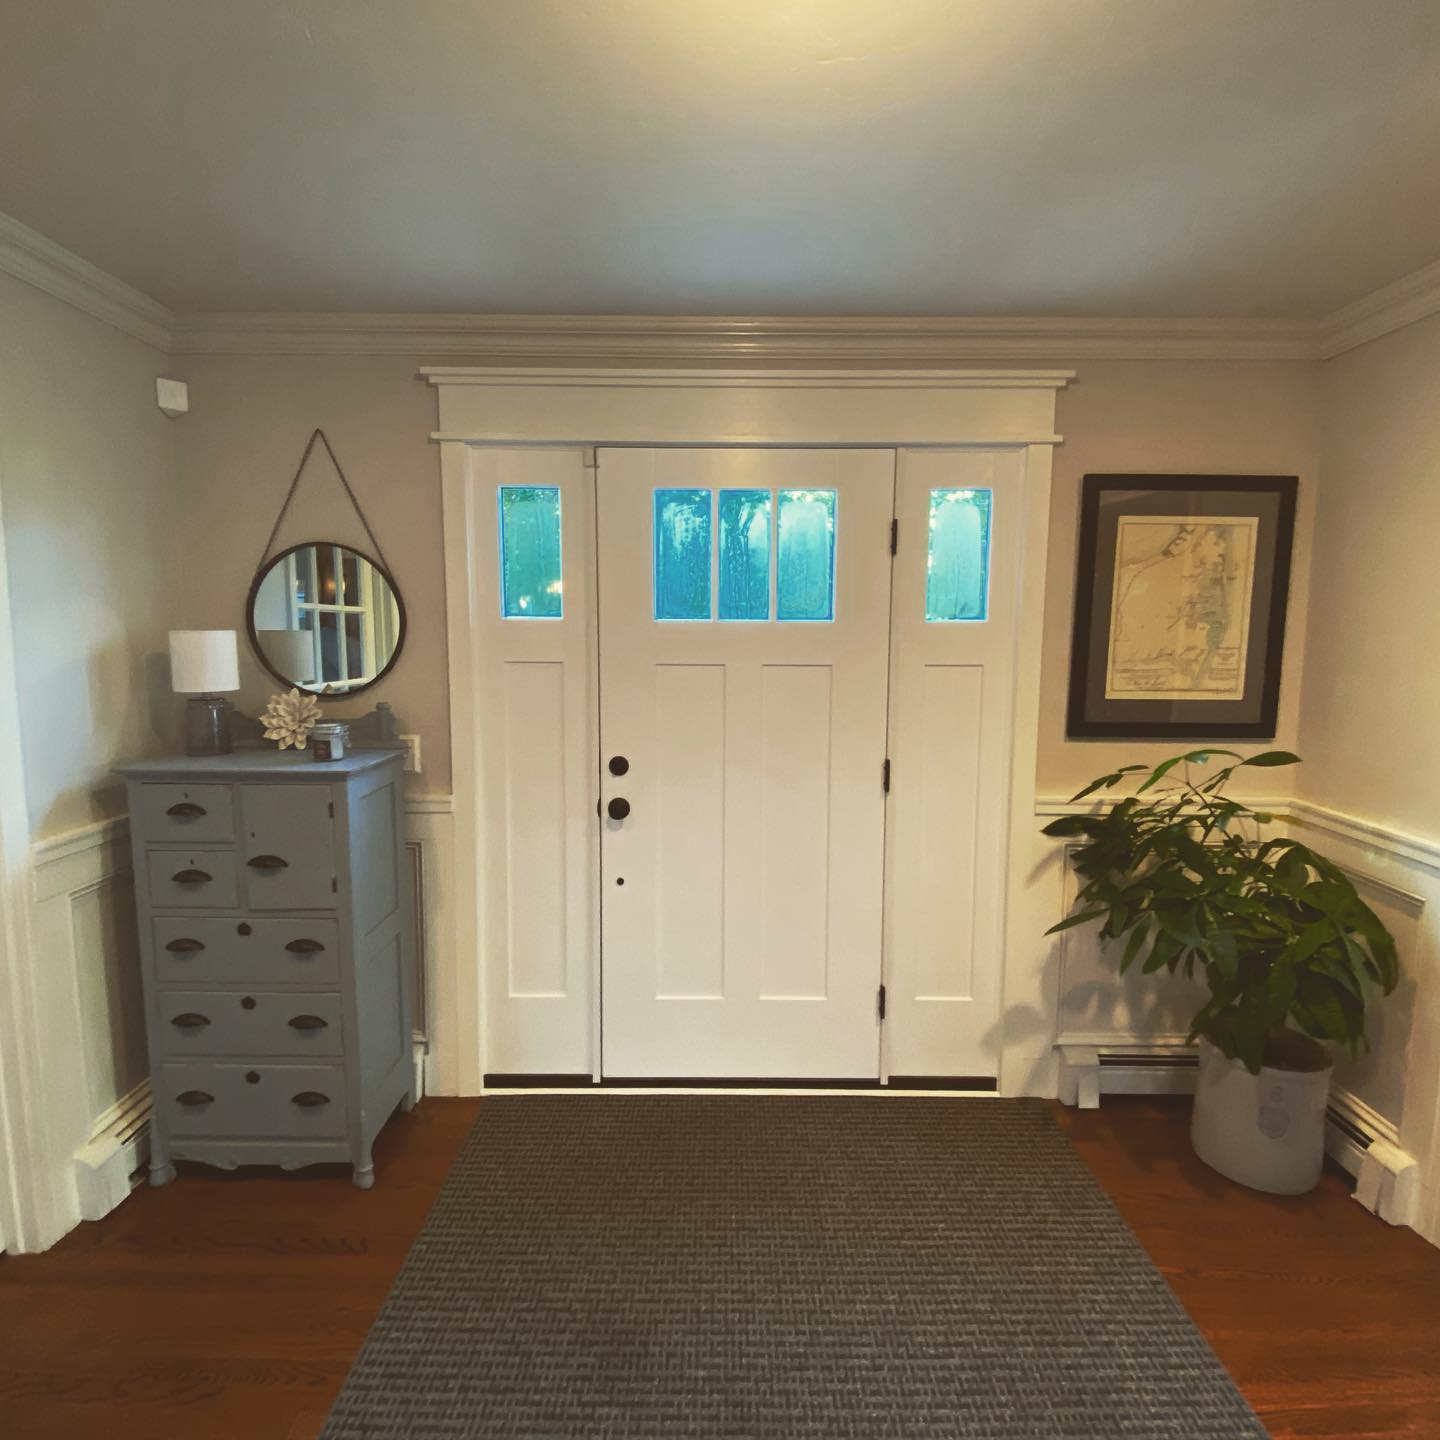 A white fiberglass entry door from the interior of the home.